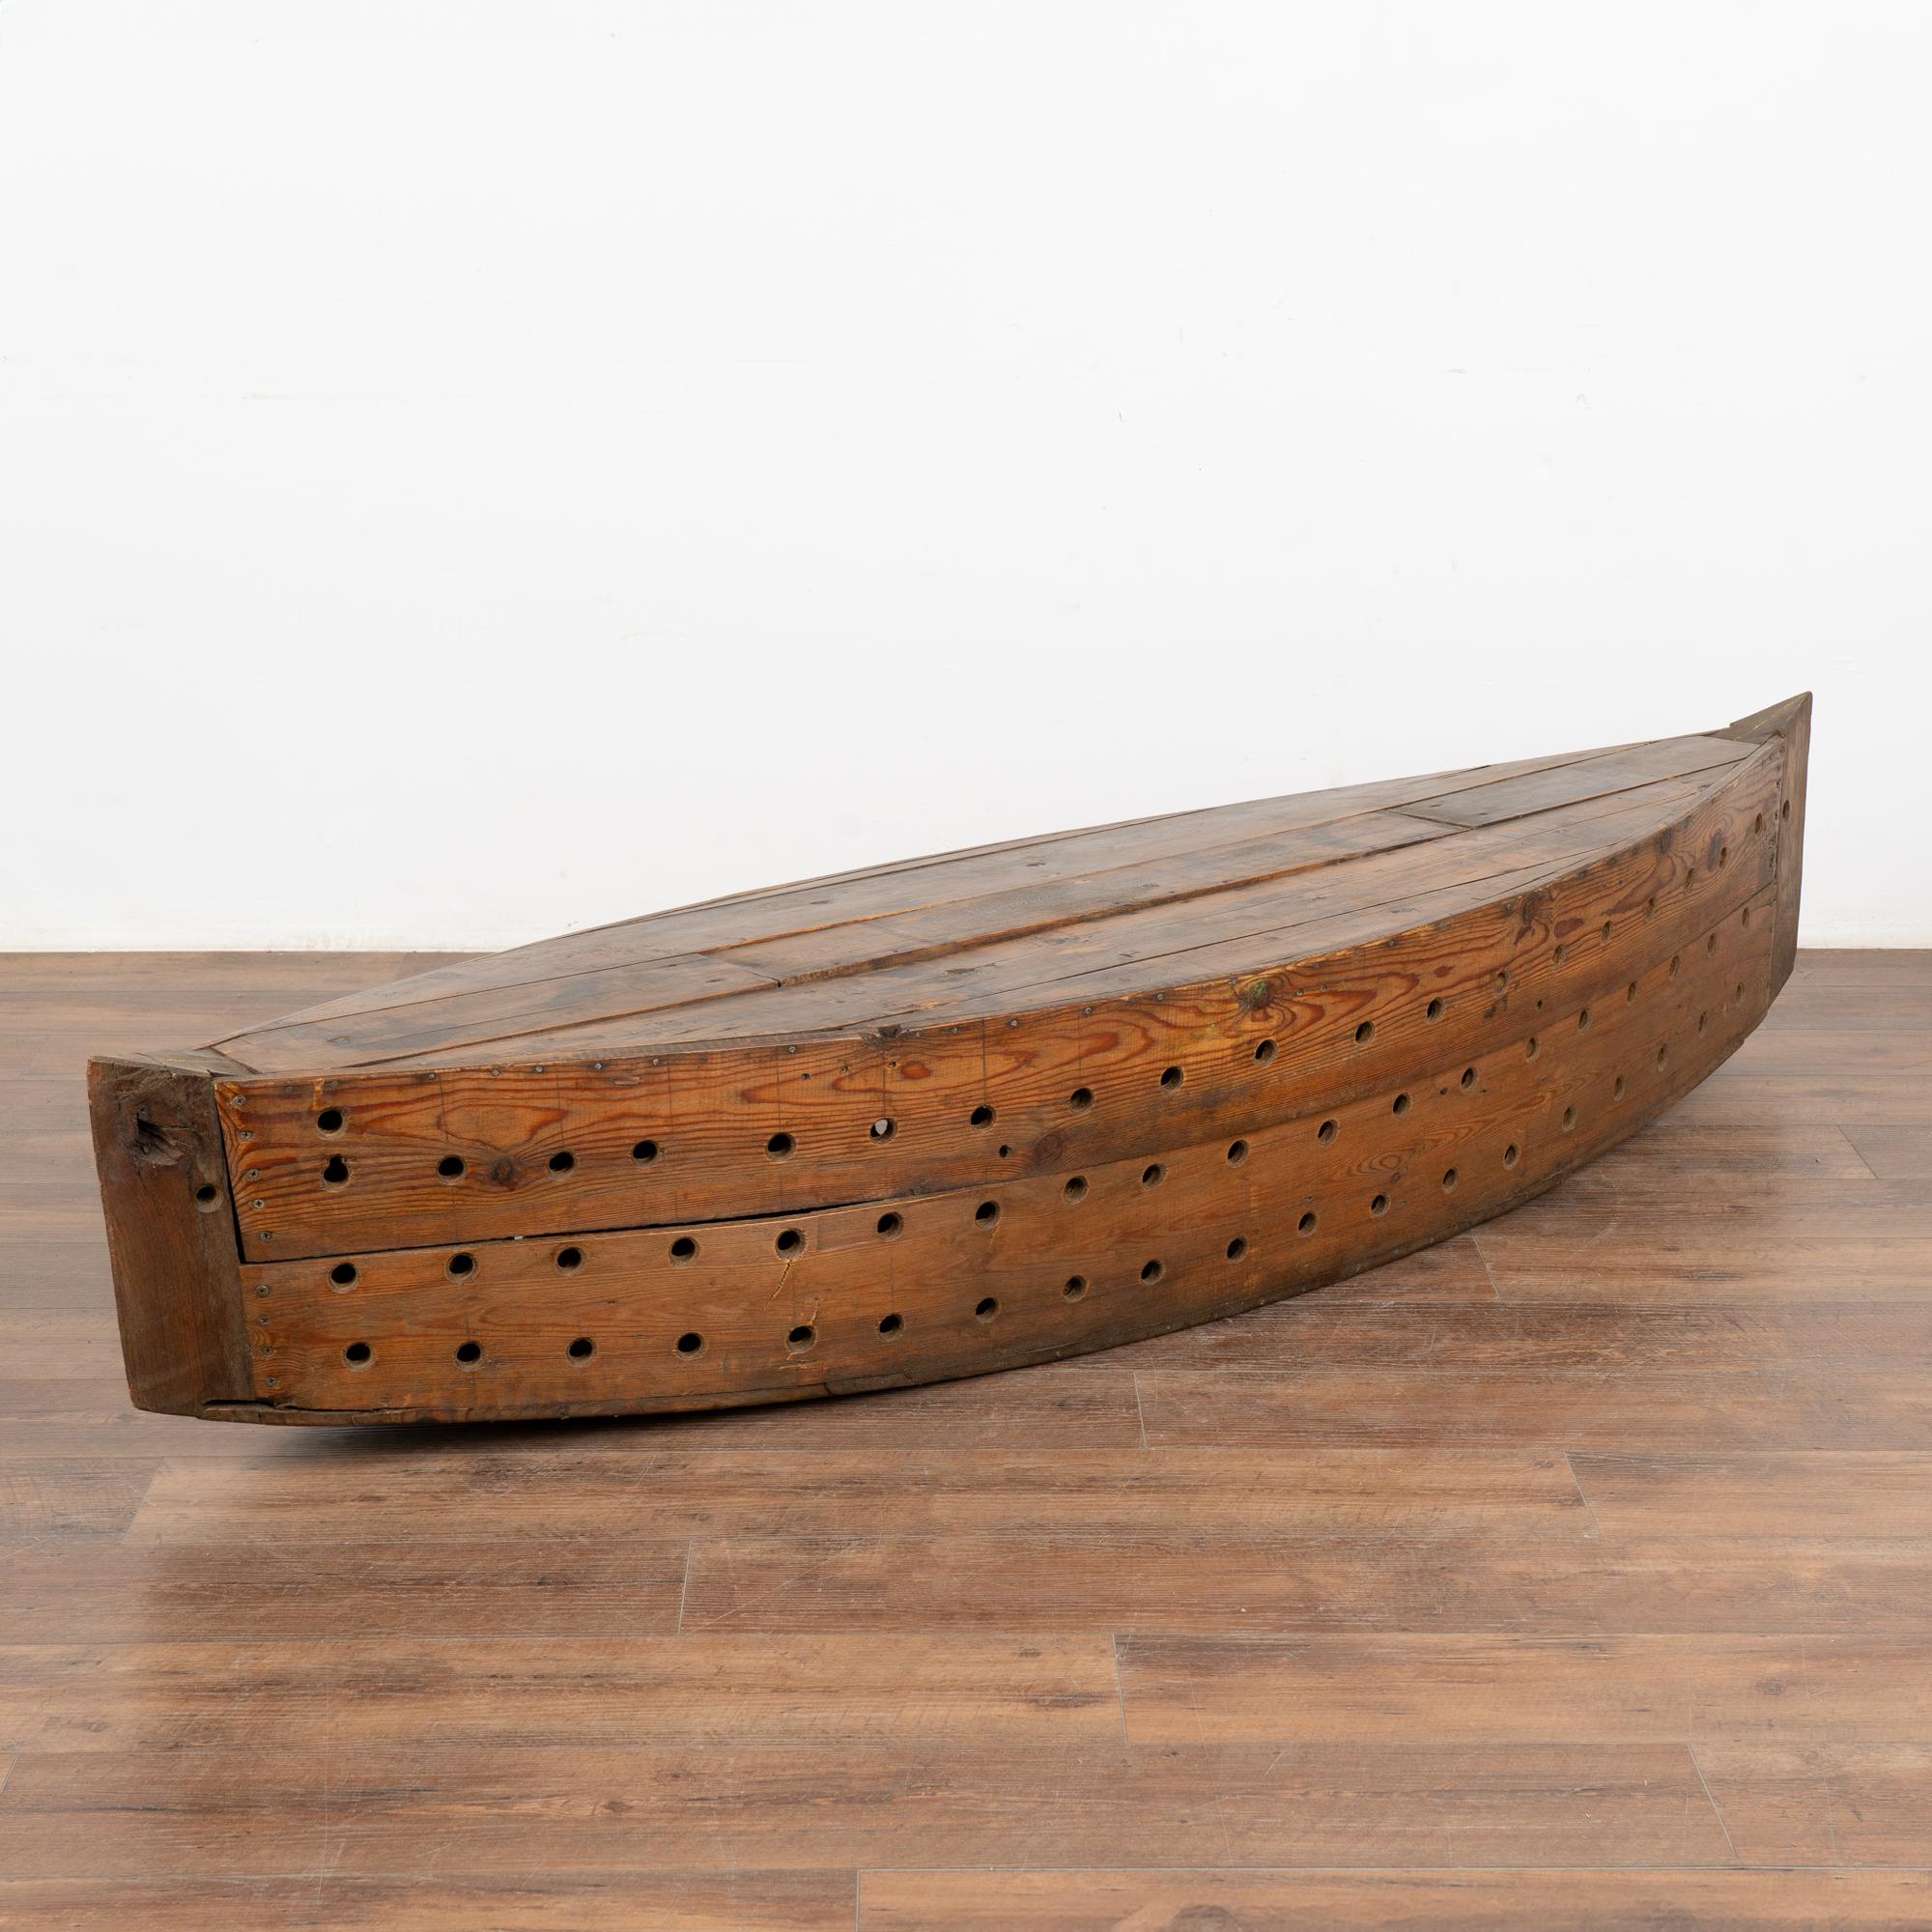 Rustic Decorative Model Boat With Holes For Fishing or Large Creel, circa 1940 For Sale 6